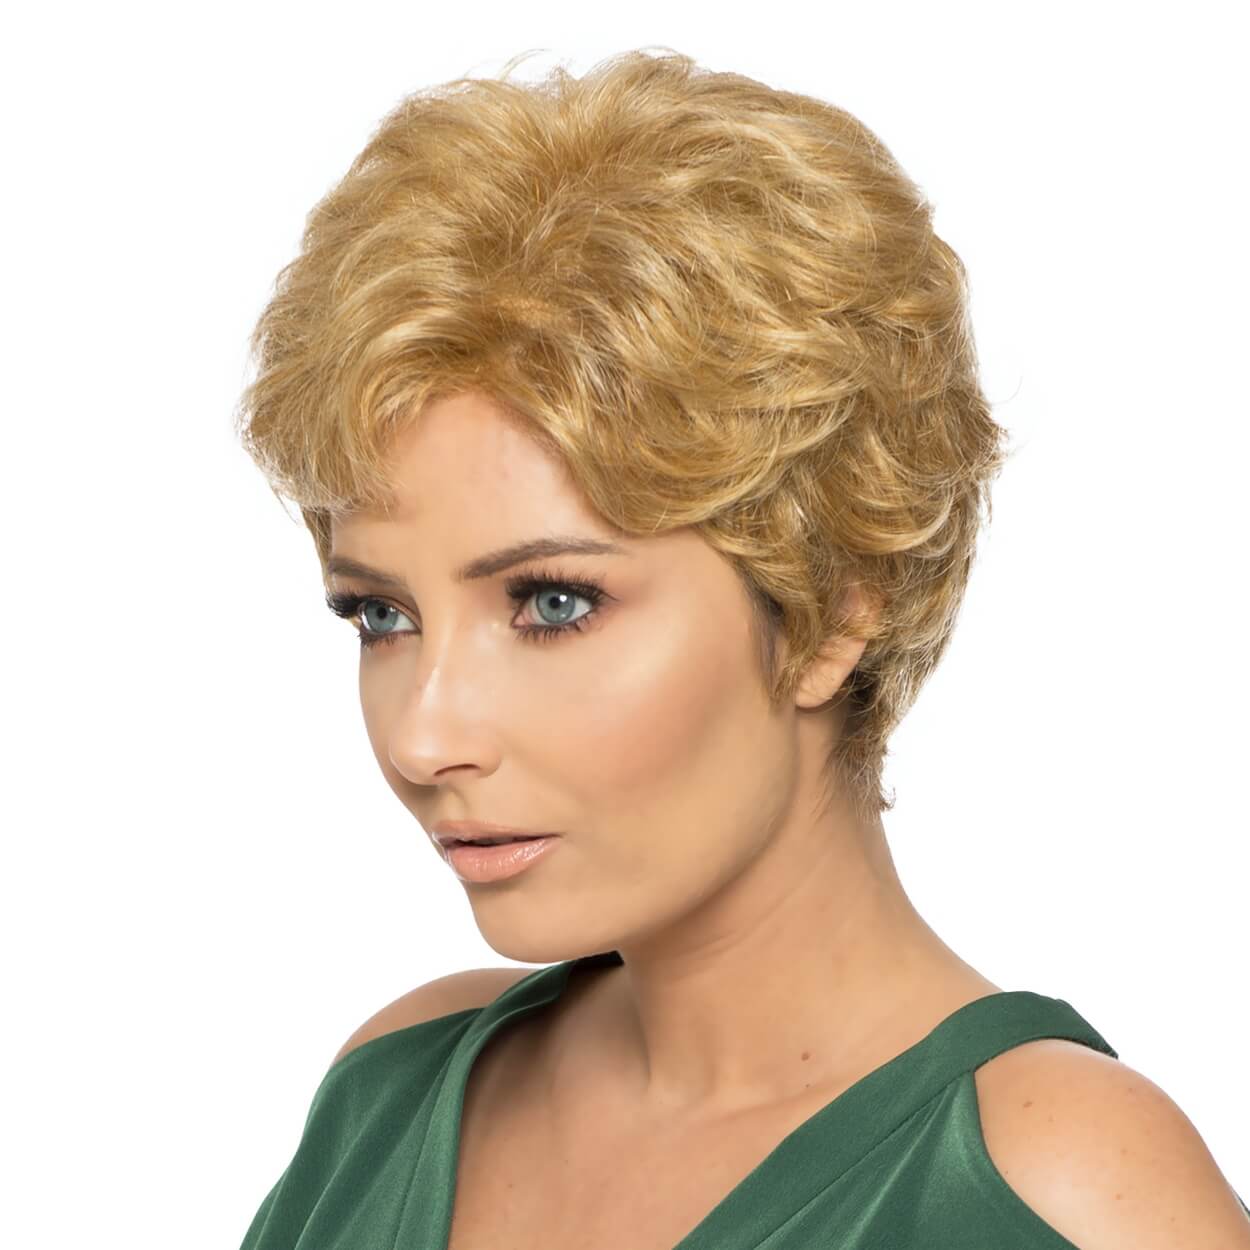 Maggie by Wig Pro in Golden Blonde Image 4